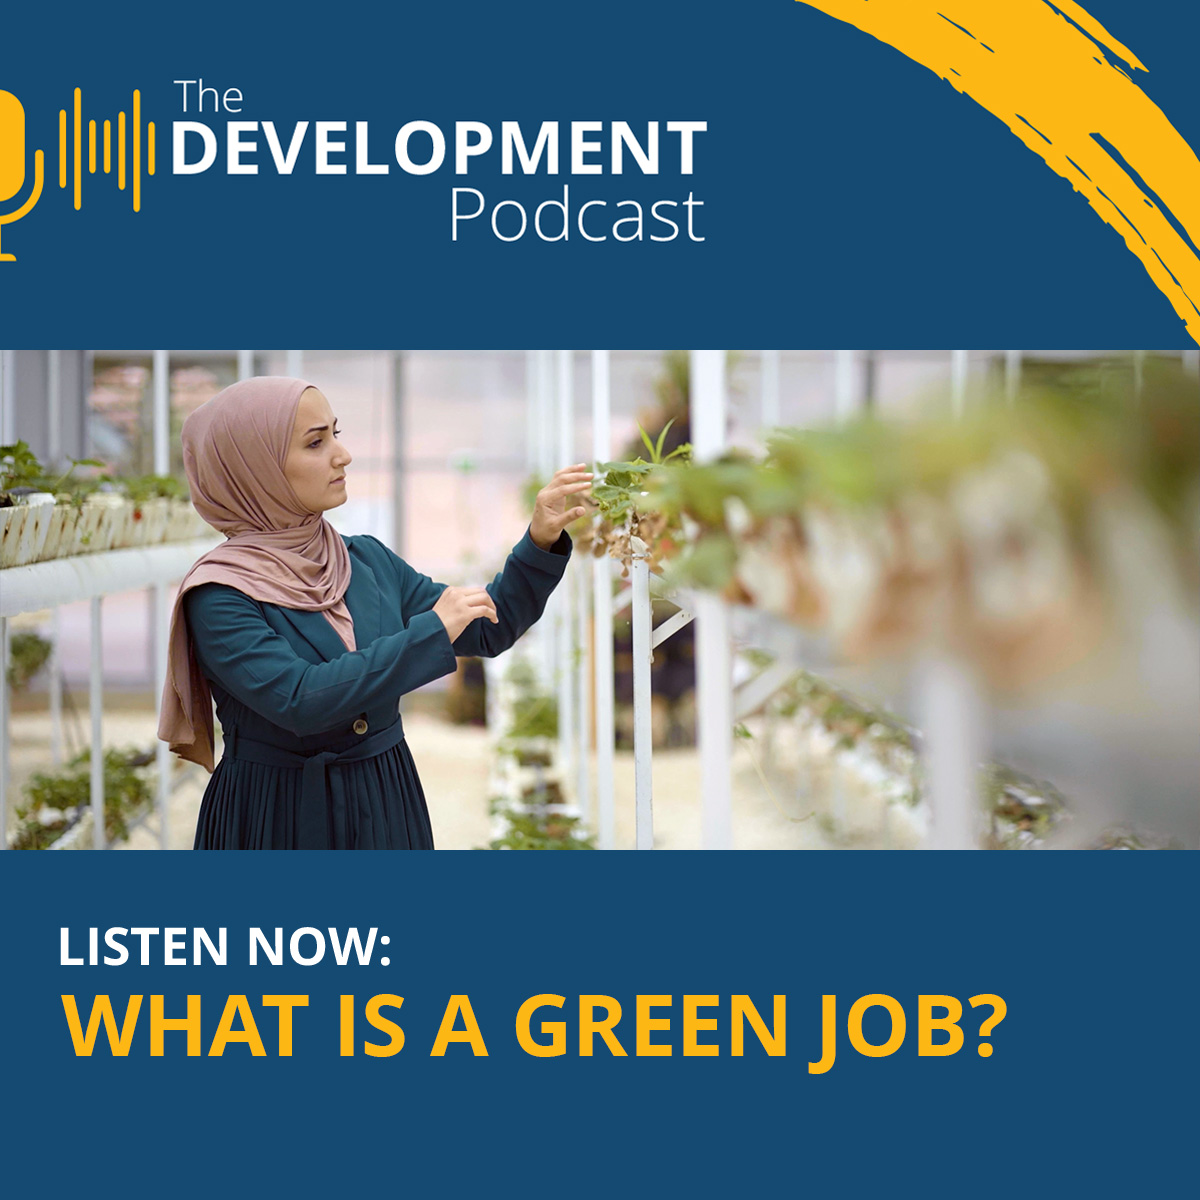 🎧Don't miss the 3rd episode of our limited series on the #DevelopmentPodcast! On this episode we dive into why #GreenJobs matter. Hear personal stories from those at the forefront of the renewable energy sector. wrld.bg/CS3W50Qzmps